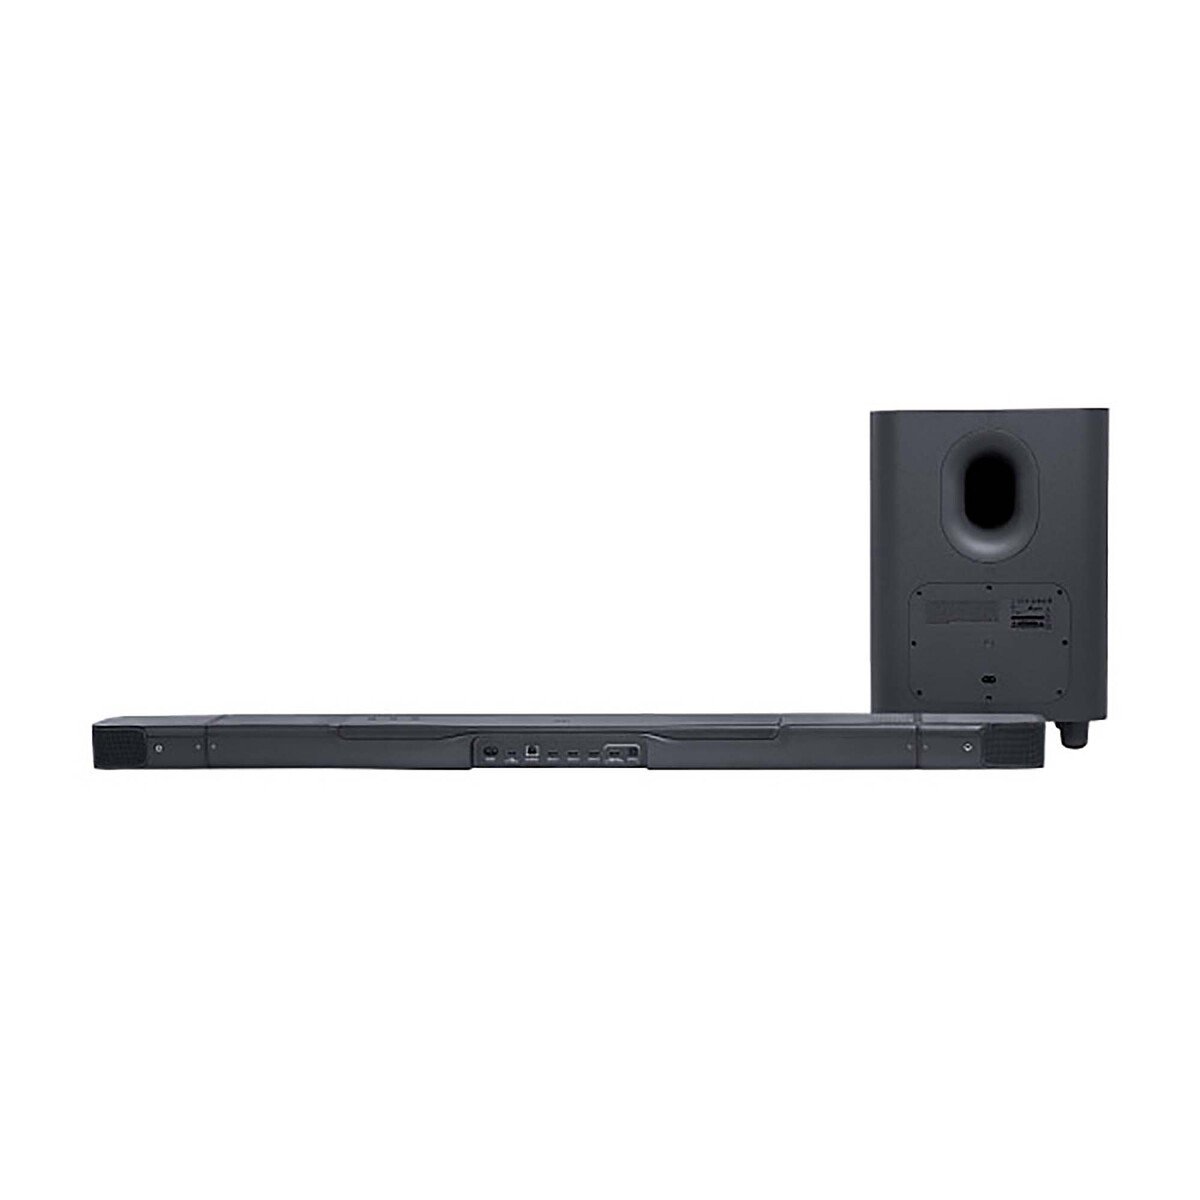 JBL BAR1000 7.1.4-channel soundbar with detachable surround speakers, MultiBeam™, Dolby Atmos®, and DTS:X